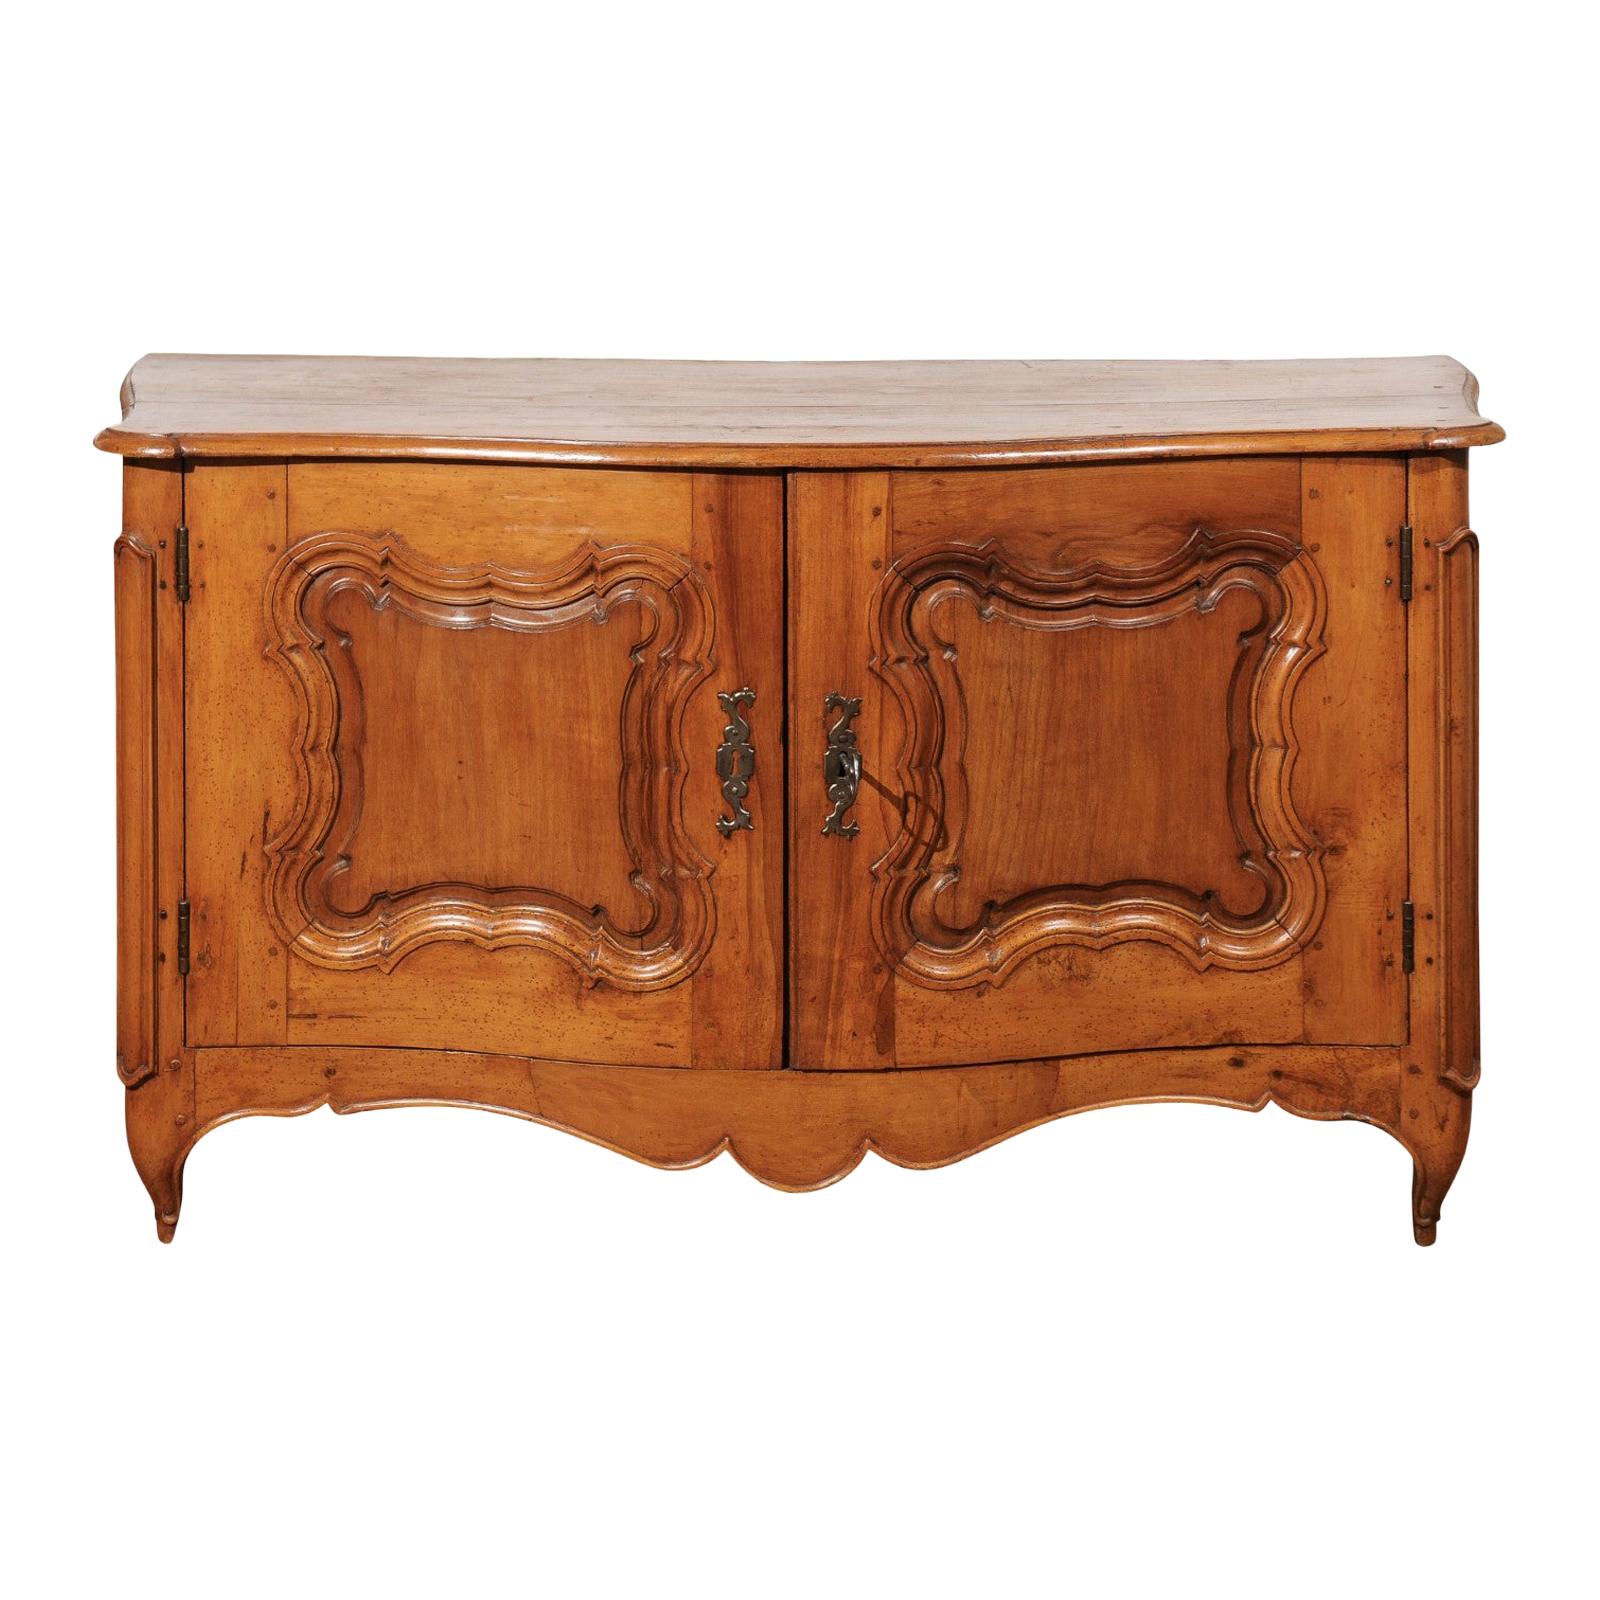 French Early 18th Century Régence Period Pearwood Buffet from Burgundy